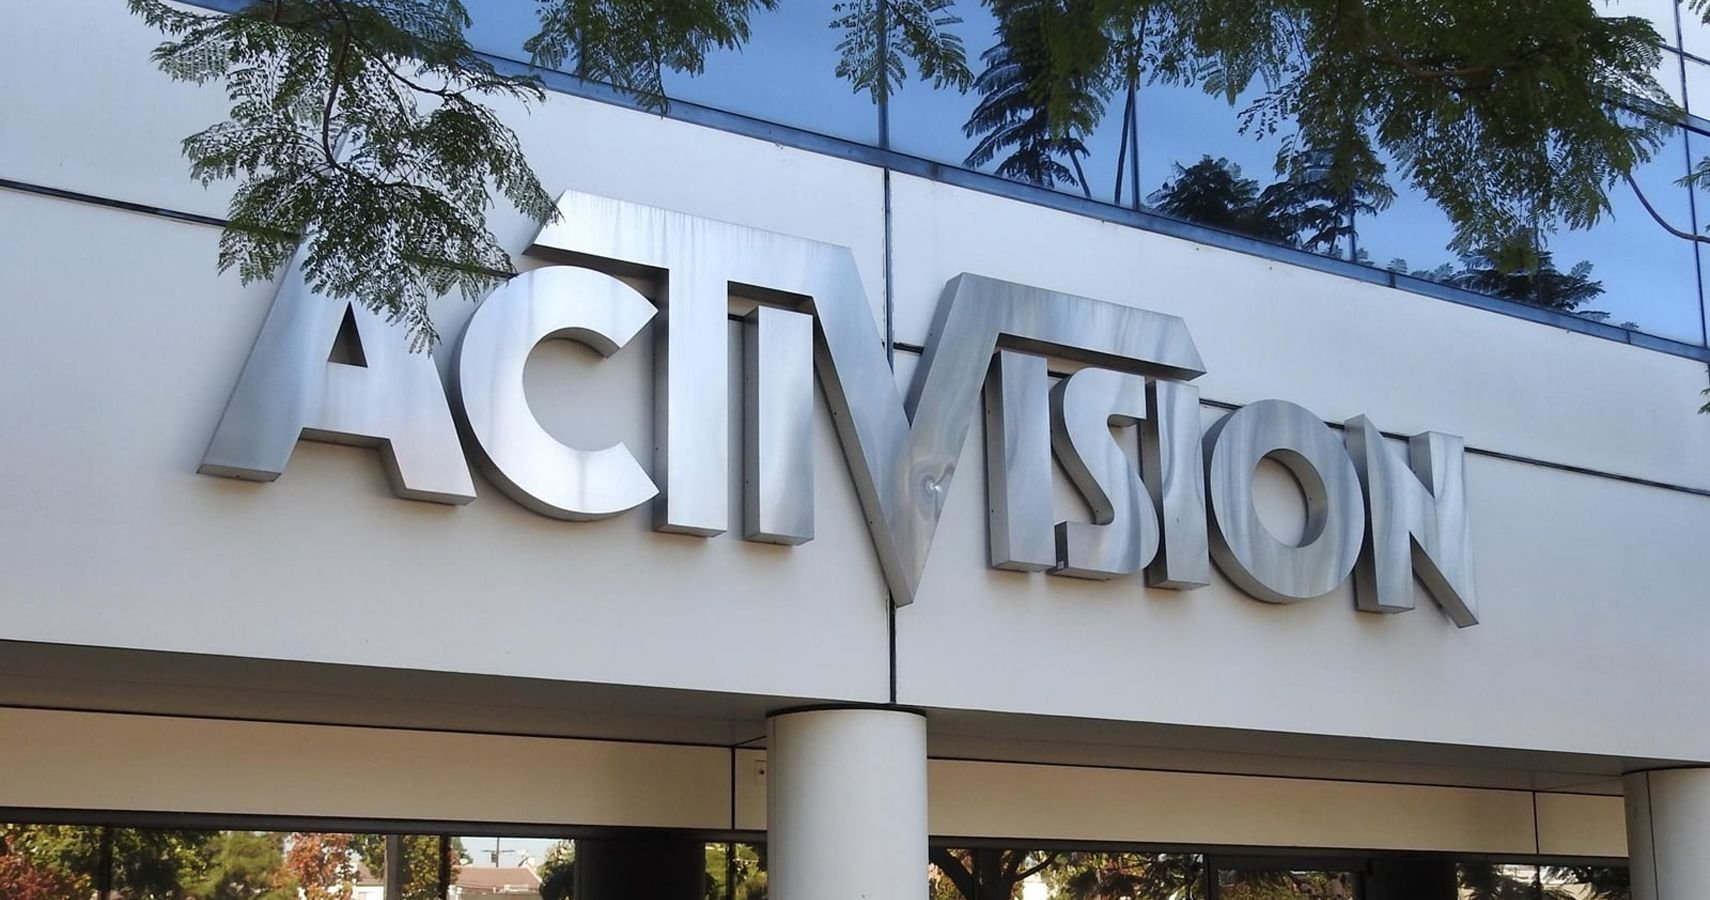 California Is Suing Activision Blizzard Over An Alleged 'Frat Boy' Culture